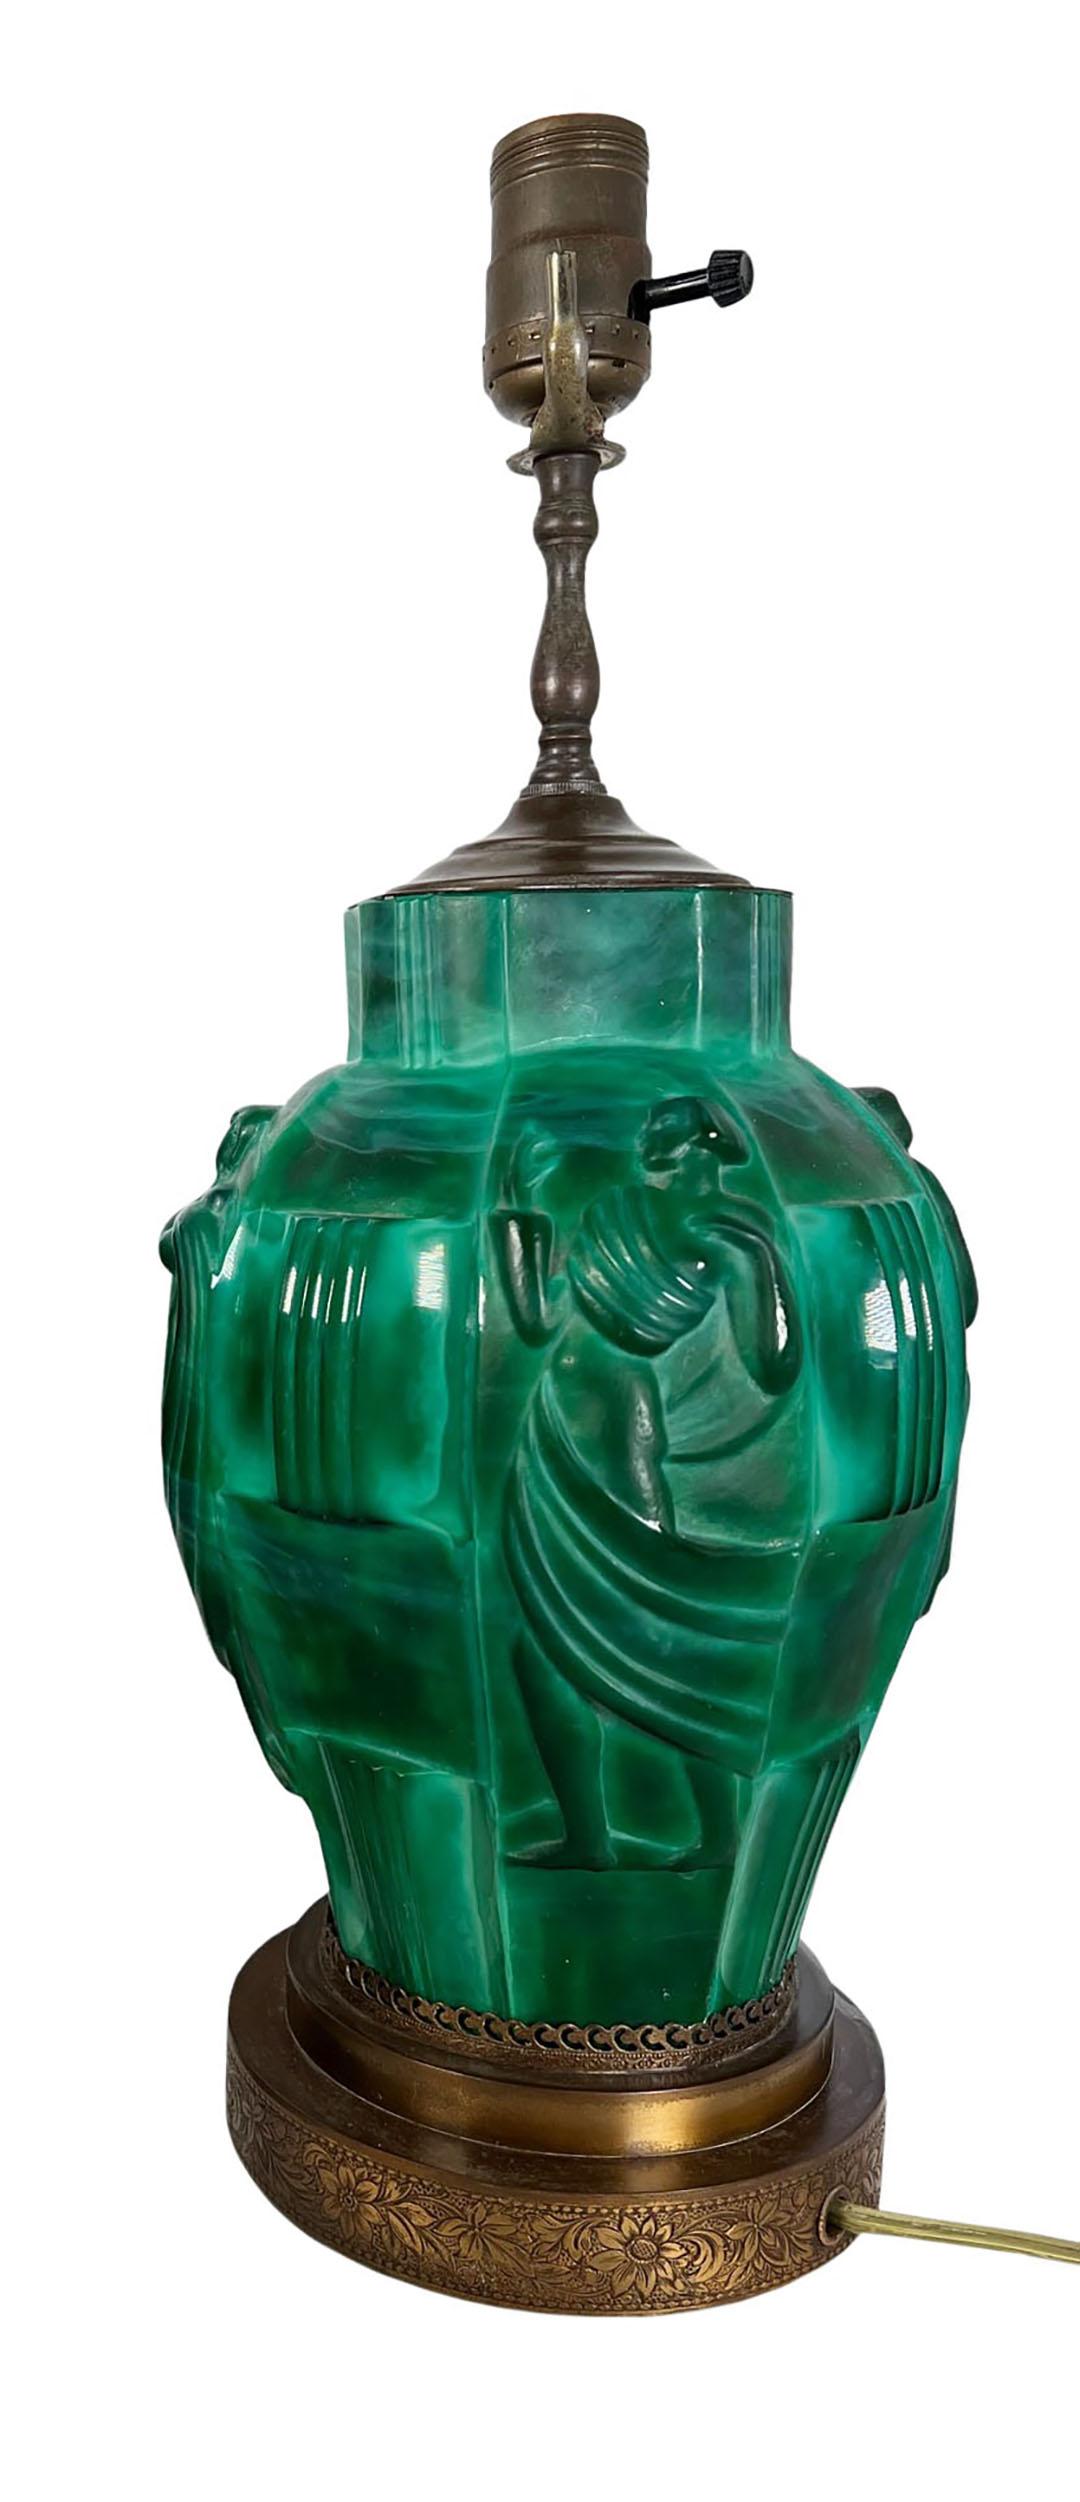 A pair of bohemian art deco style malachite glass vases with figures. By Curt Schlevogt converted into lamps with brass mounts. Mid 20th century, Czechoslovakia.